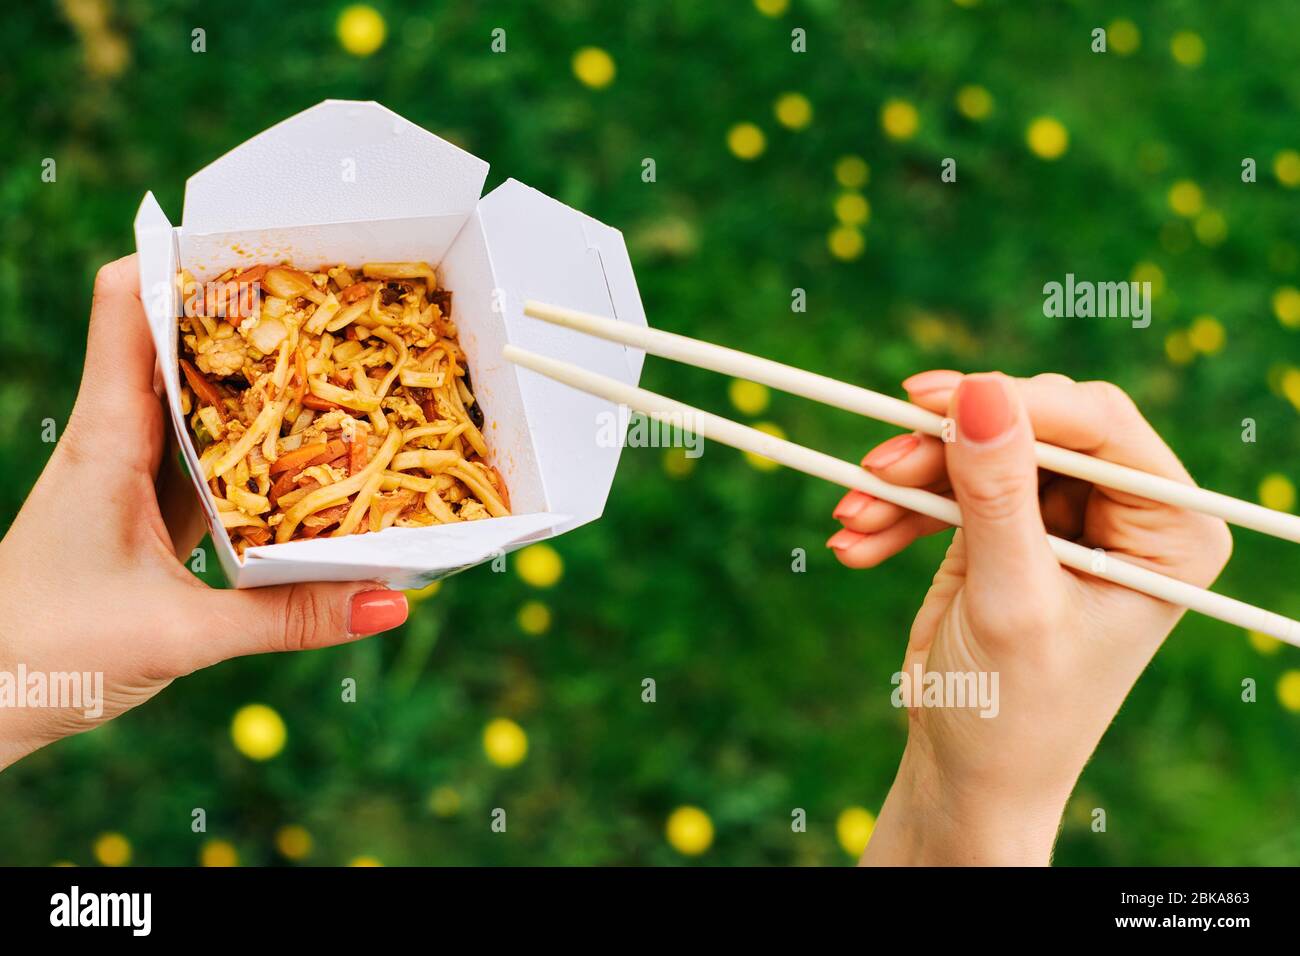 Wok And Go High Resolution Stock Photography and Images - Alamy